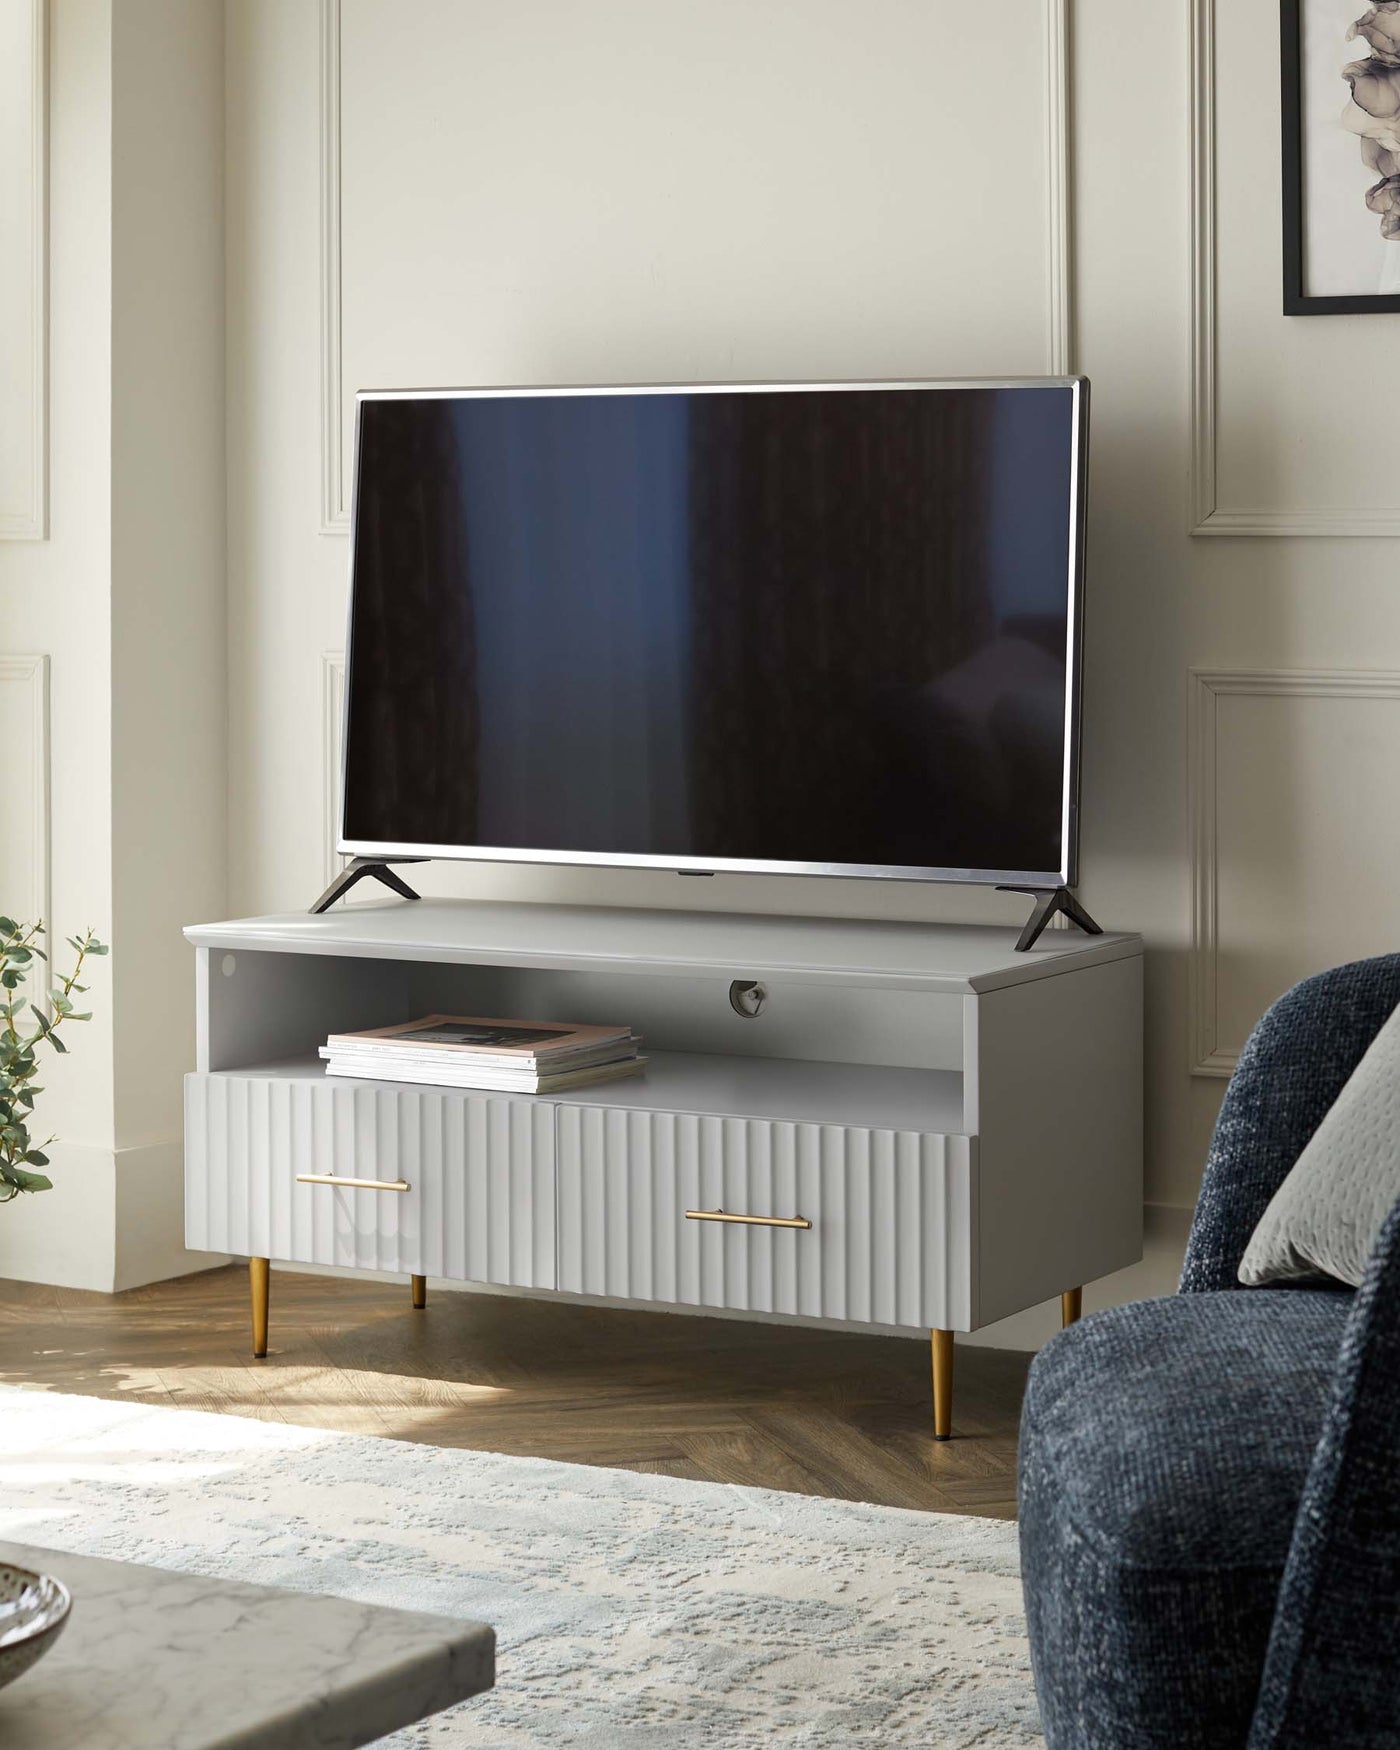 Modern light grey media console with ribbed front drawer detail and brass finished elongated handles, supported by gently tapered legs with gold-tone tips. It is positioned against a wall in a well-lit room, topped with a large flat-screen TV, and flanked by a small stack of books to the side.